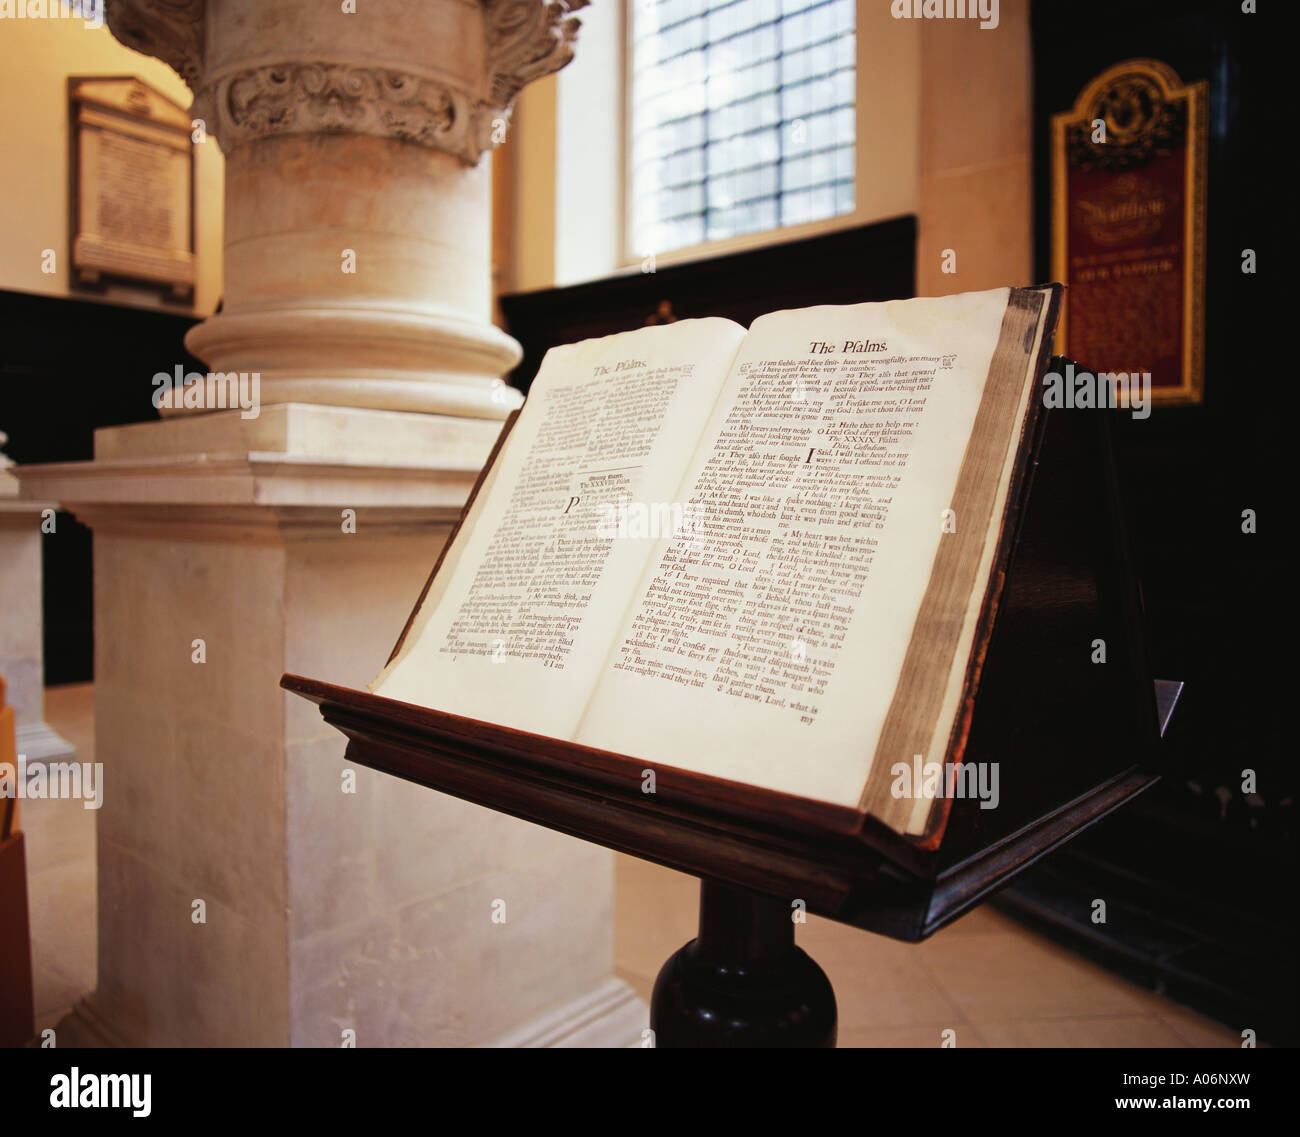 Bible open at the Psalms in St Stephen's Walbrook Church London Stock Photo